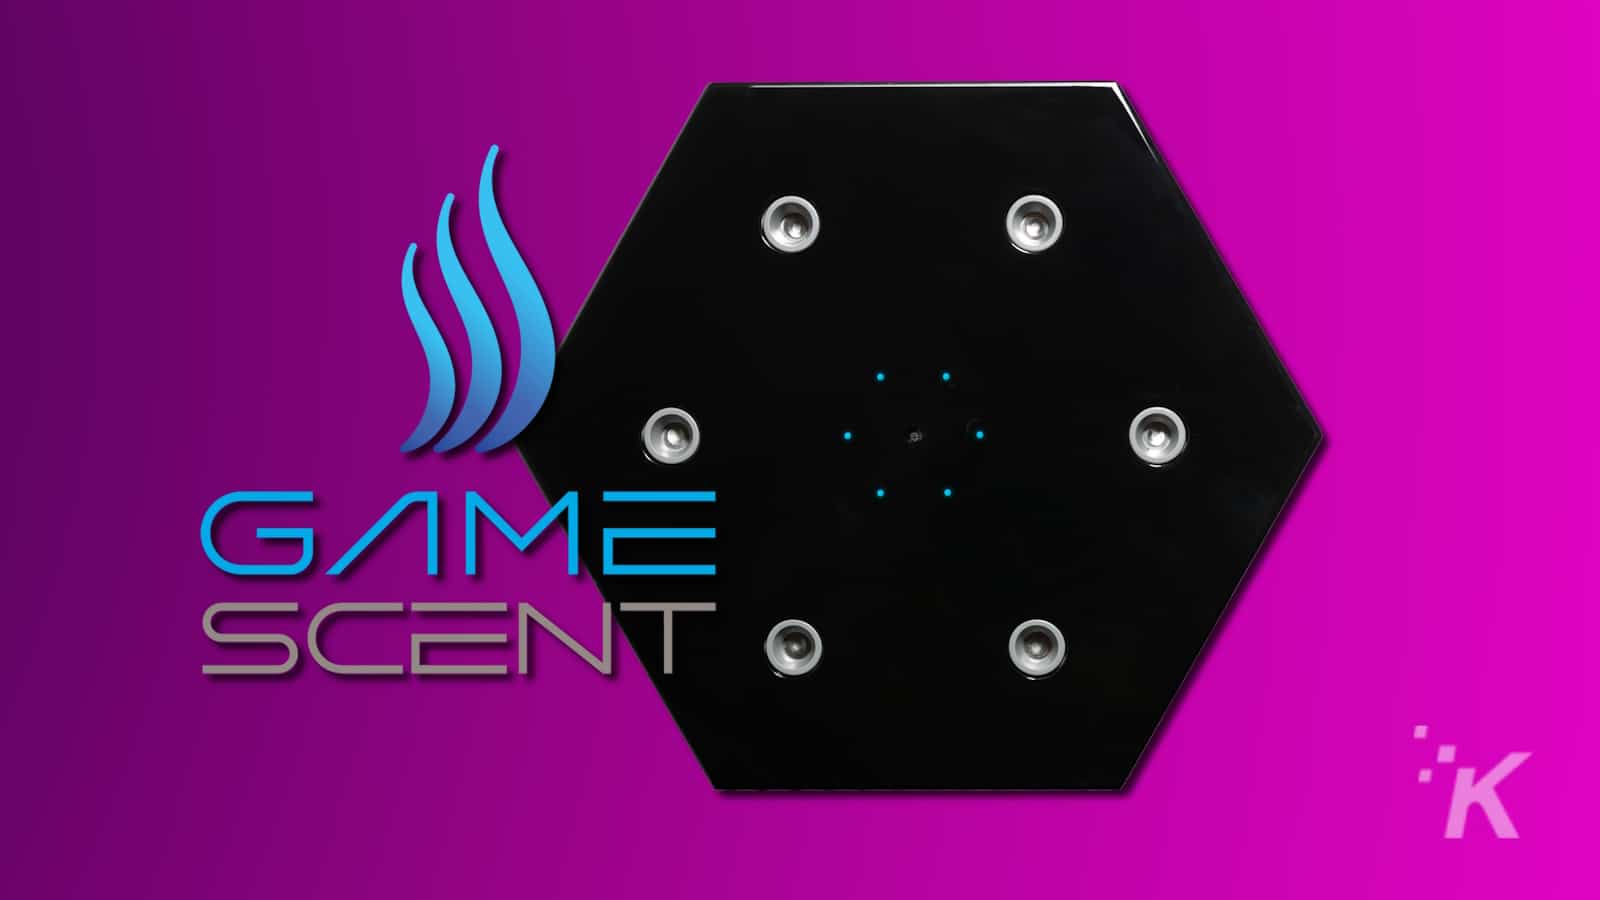 Gamescent refill slots and logo